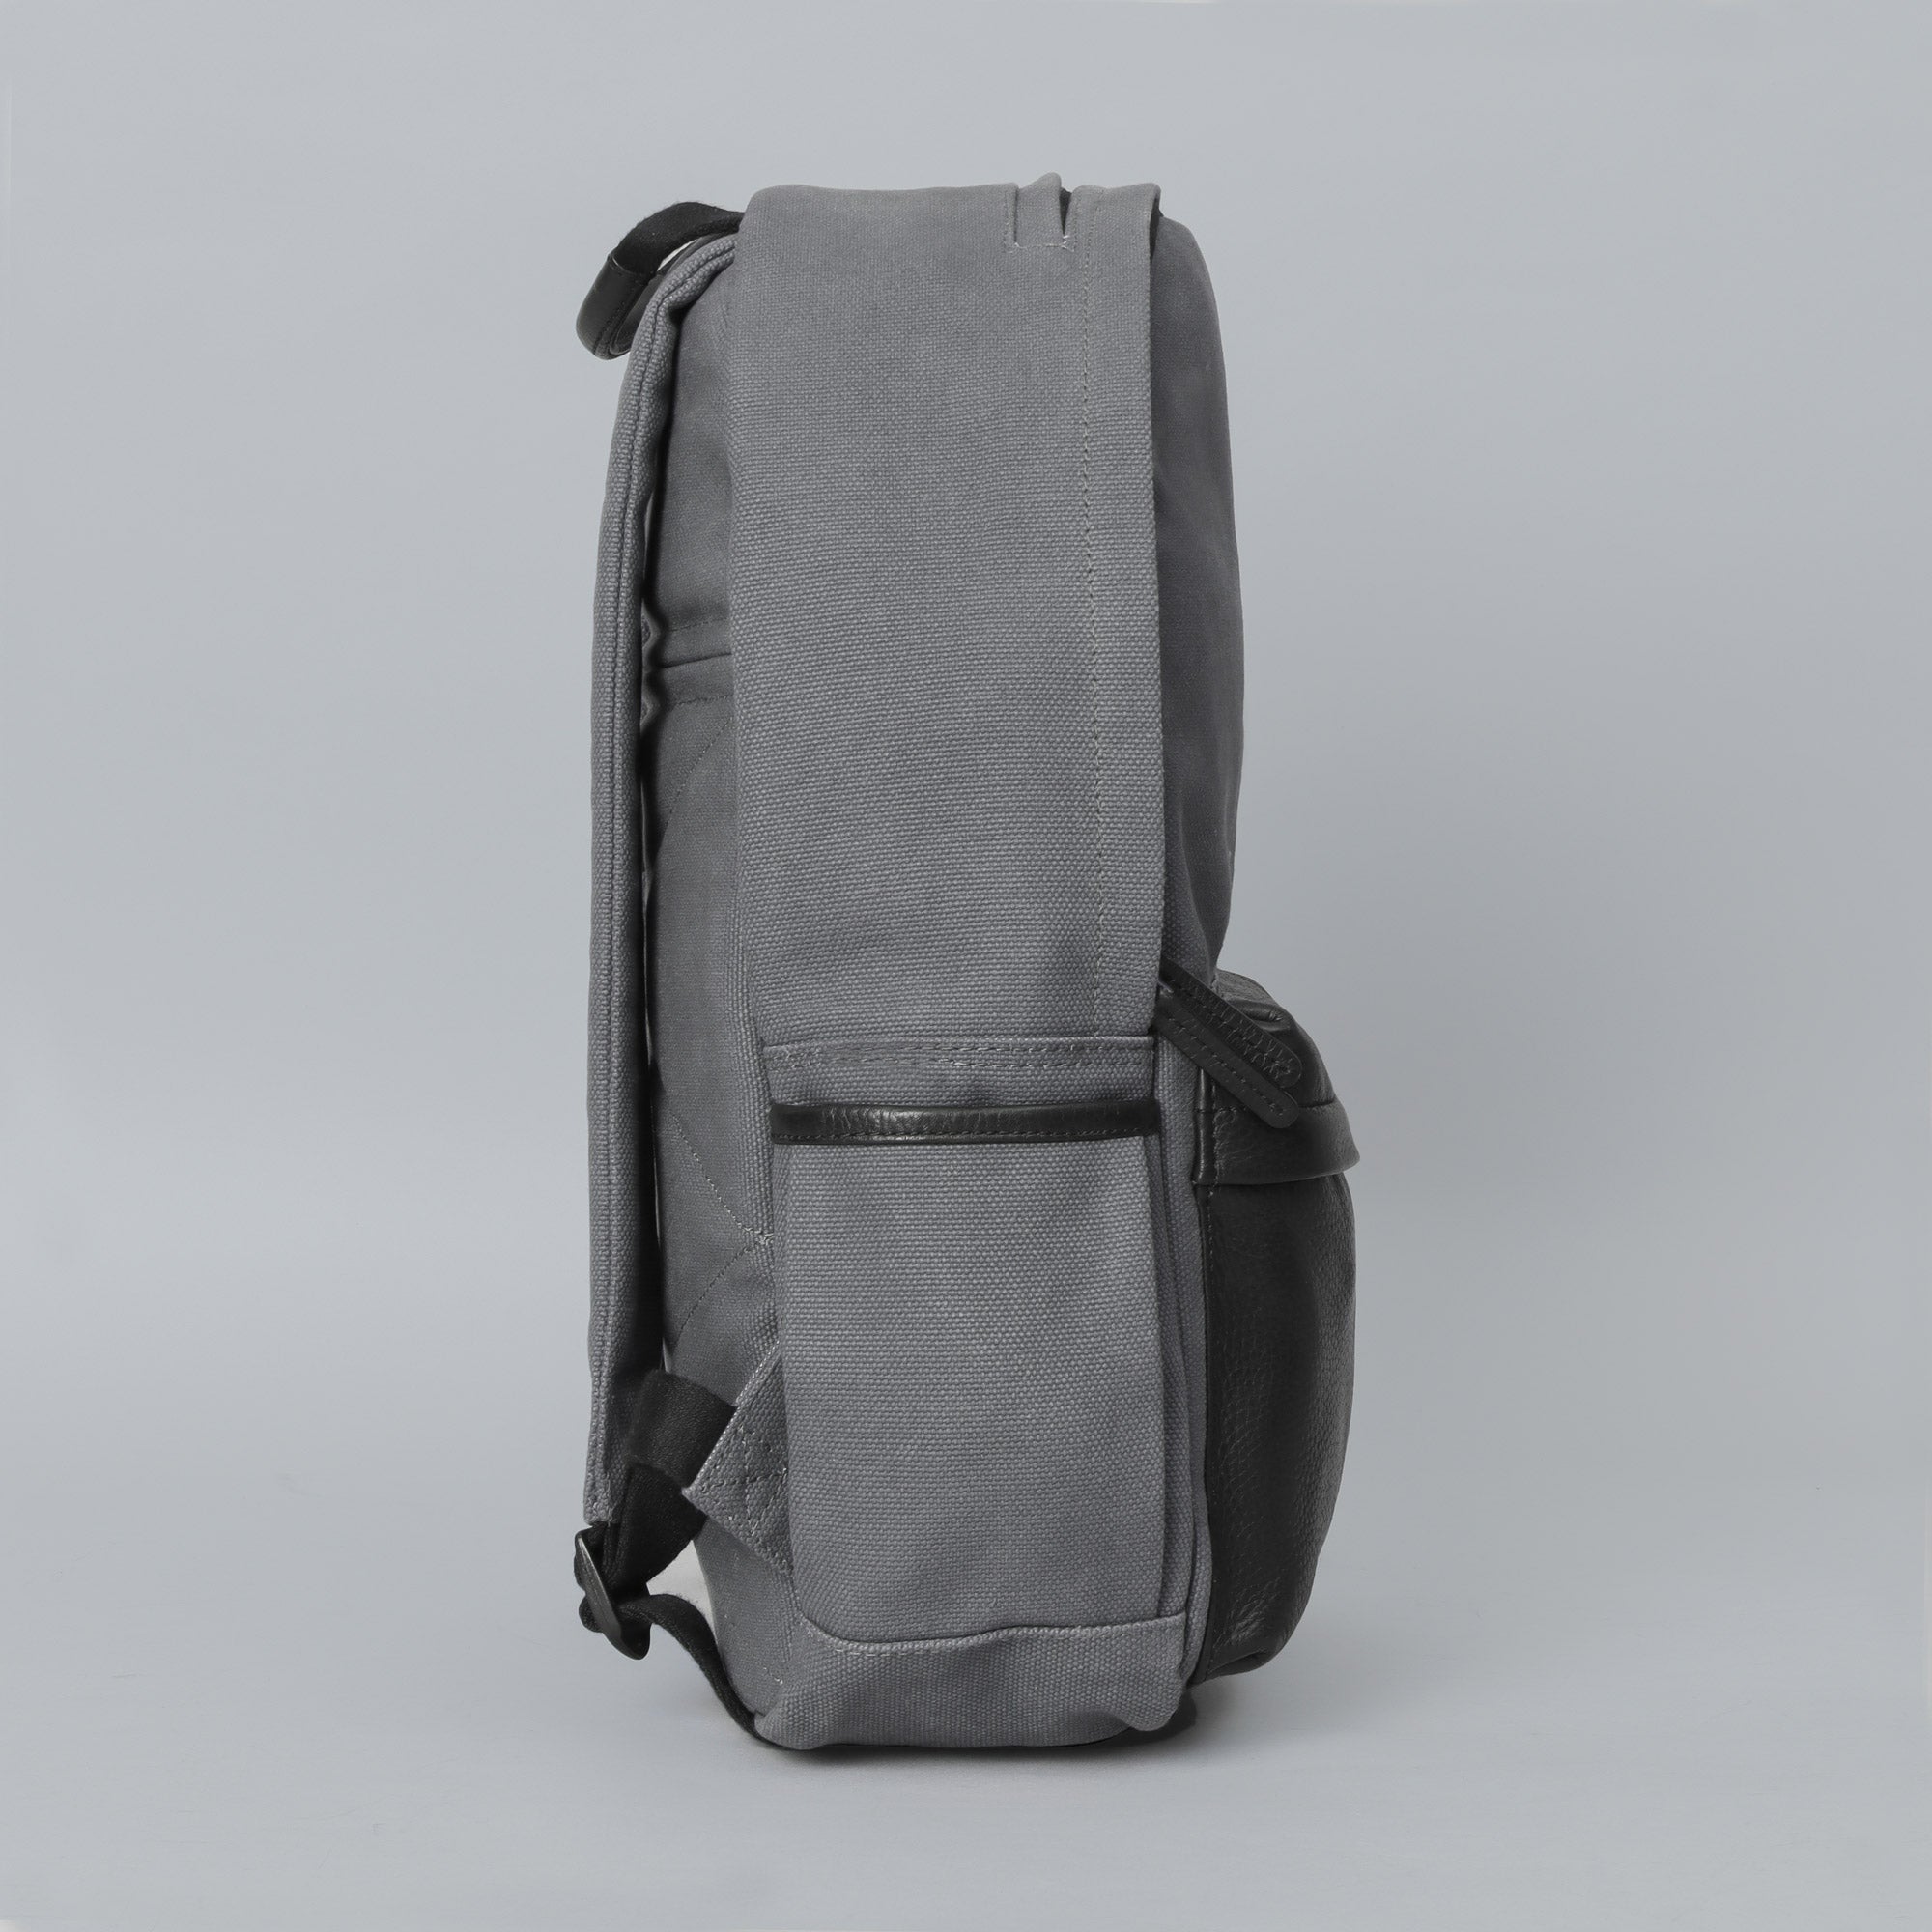 grey canvas college backpack